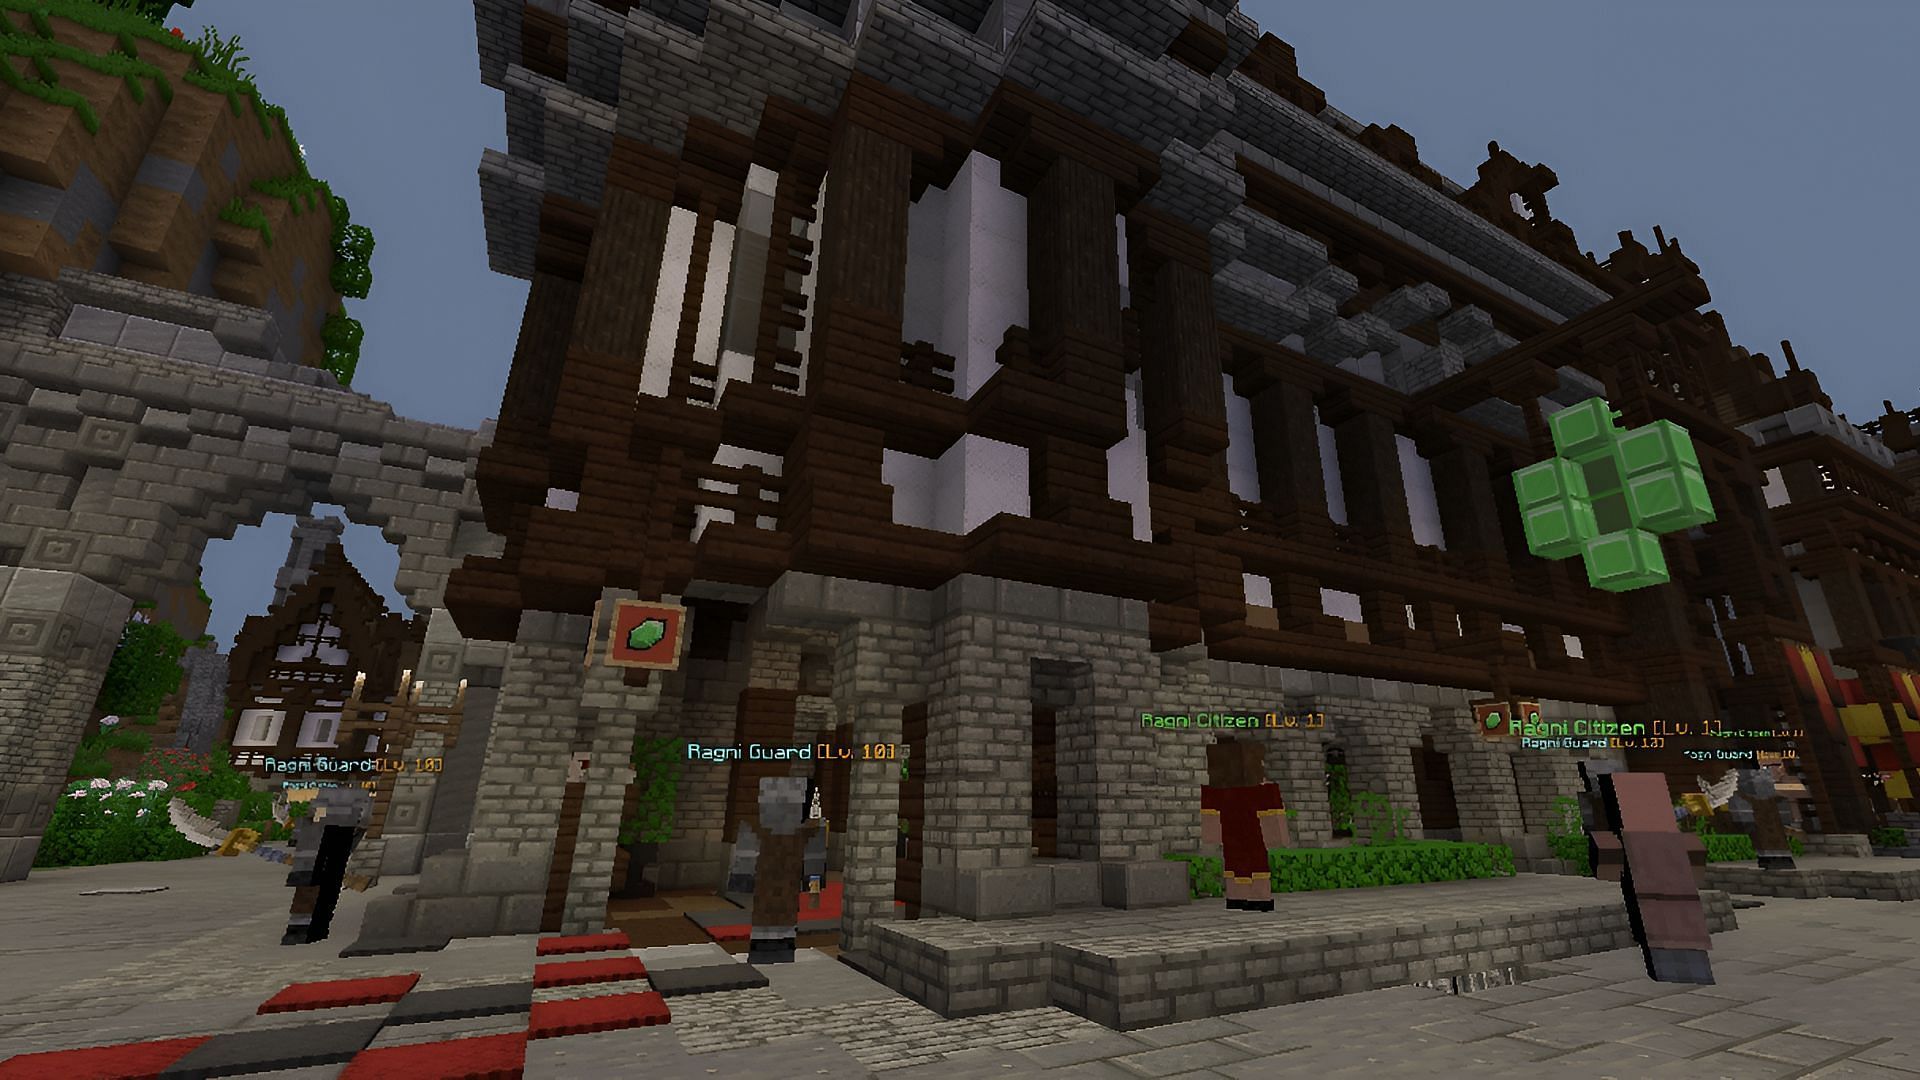 The bank of Ragni in the Wynncraft server for Minecraft: Java Edition (Image via Wynncraft)